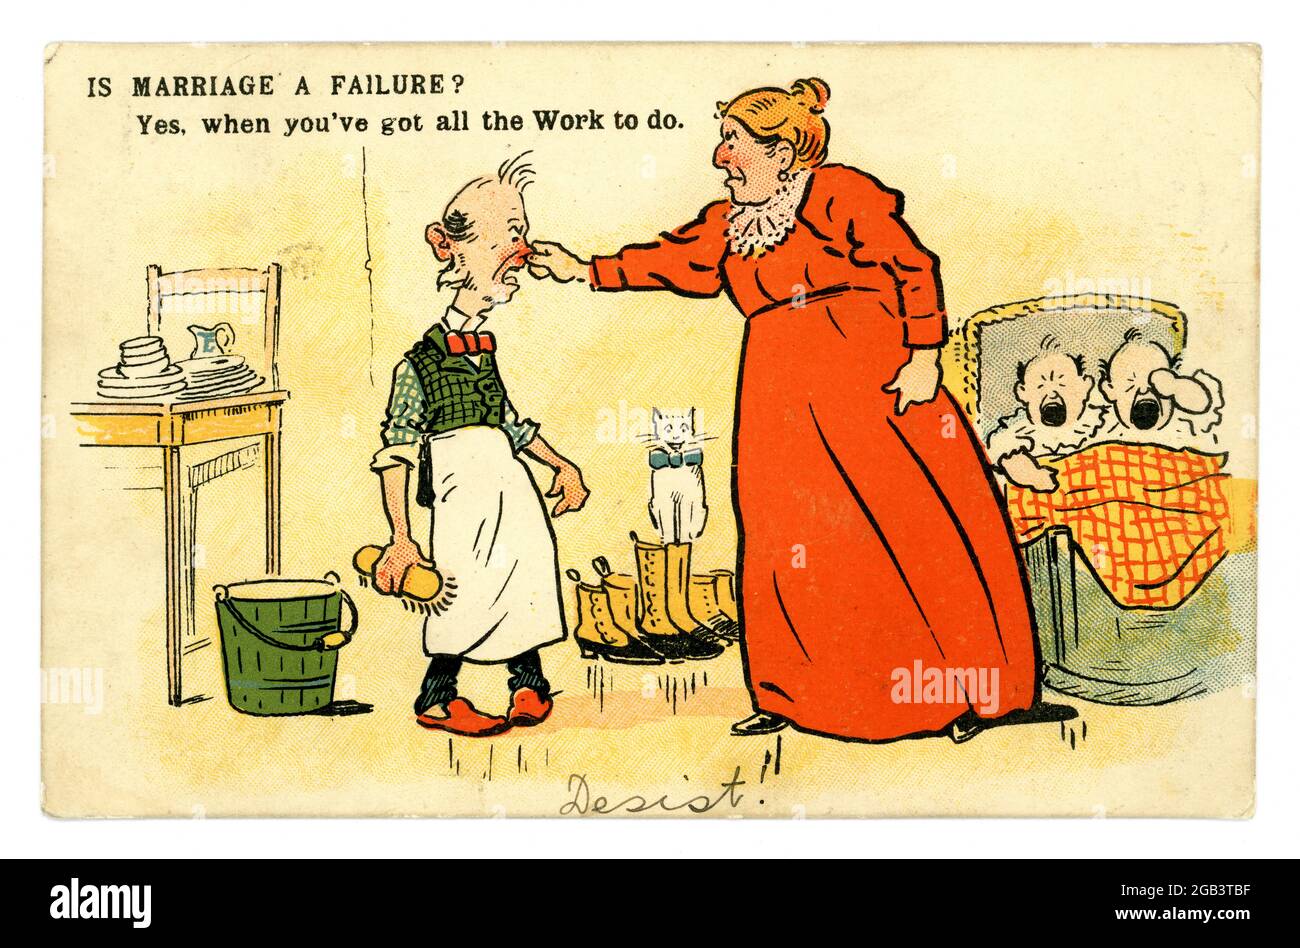 Original Edwardian anti-suffragette comic postcard depicting a bossy , overbearing woman pinching her meek working house husband's nose, 'Is Marriage a failure?', posted May 1907, U.K. Stock Photo